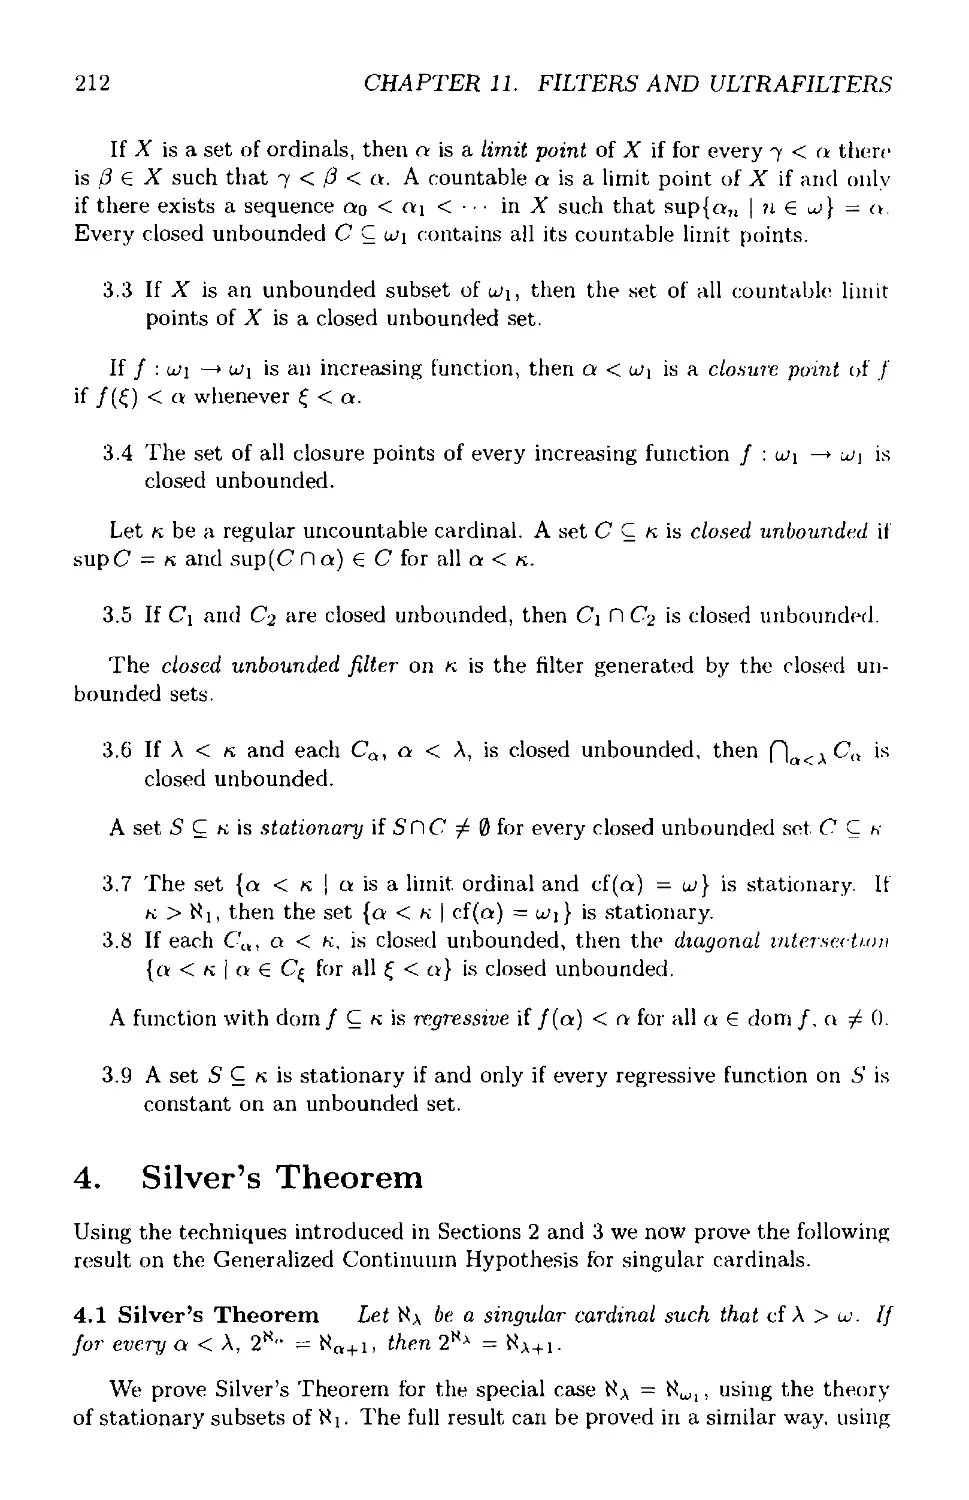 4 Silver's Theorem